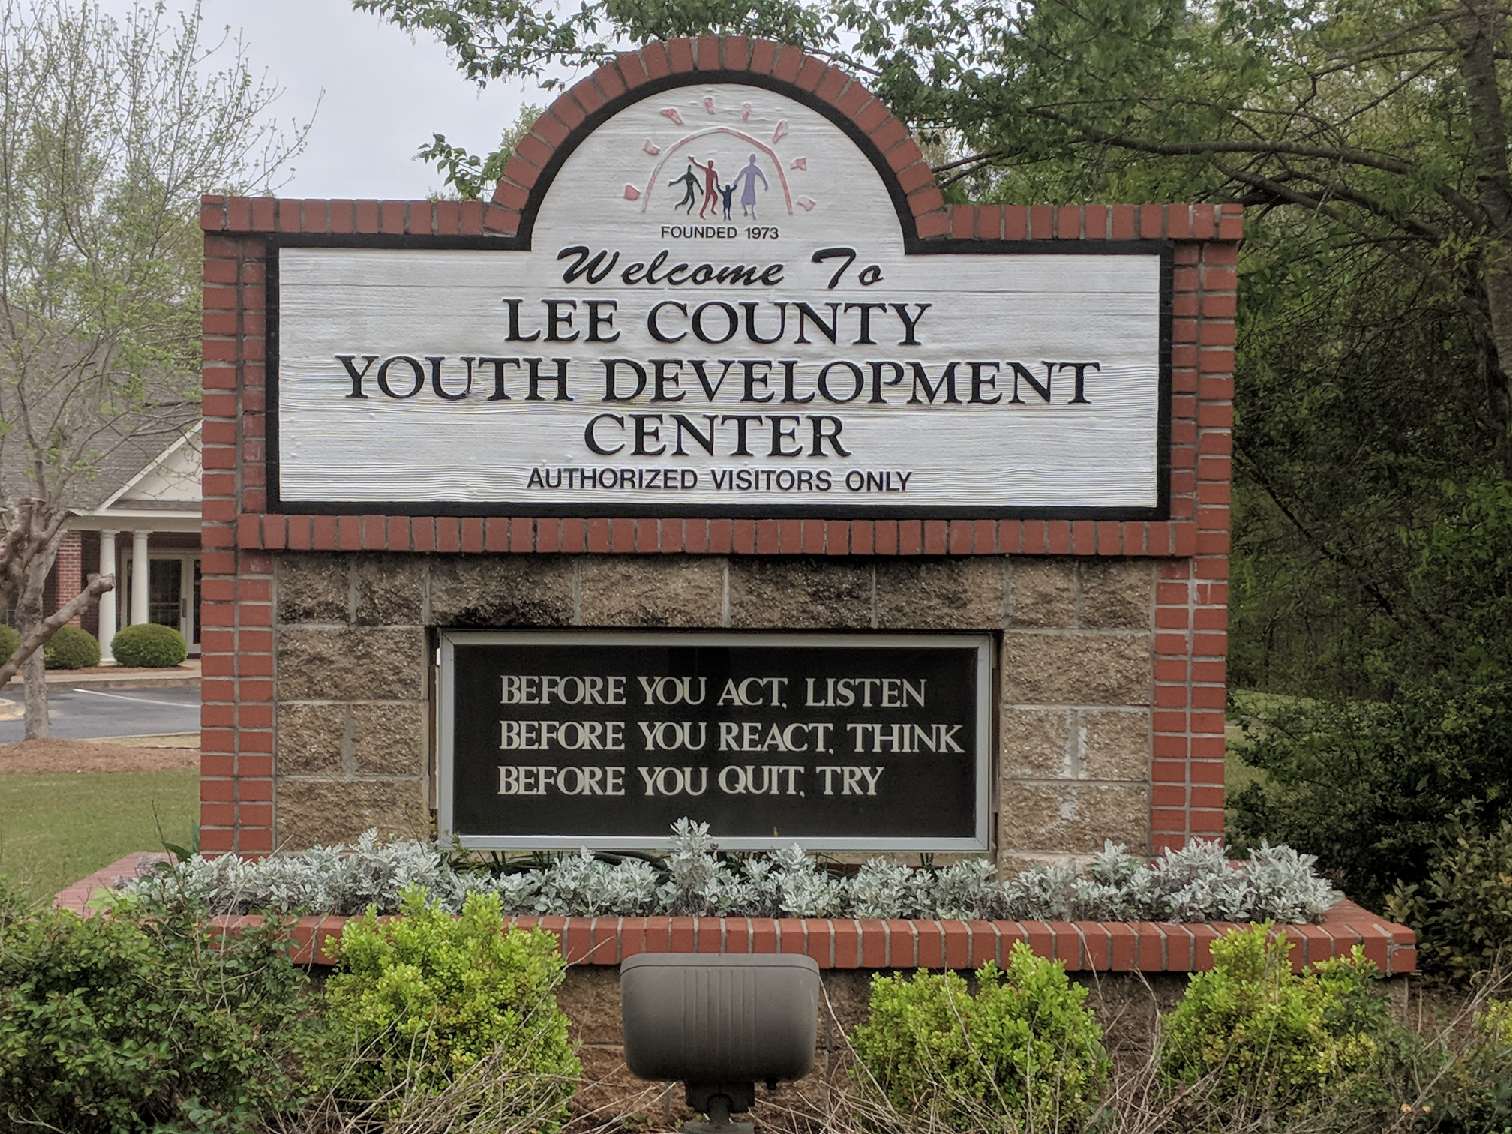 Total 37+ imagen lee county youth development center